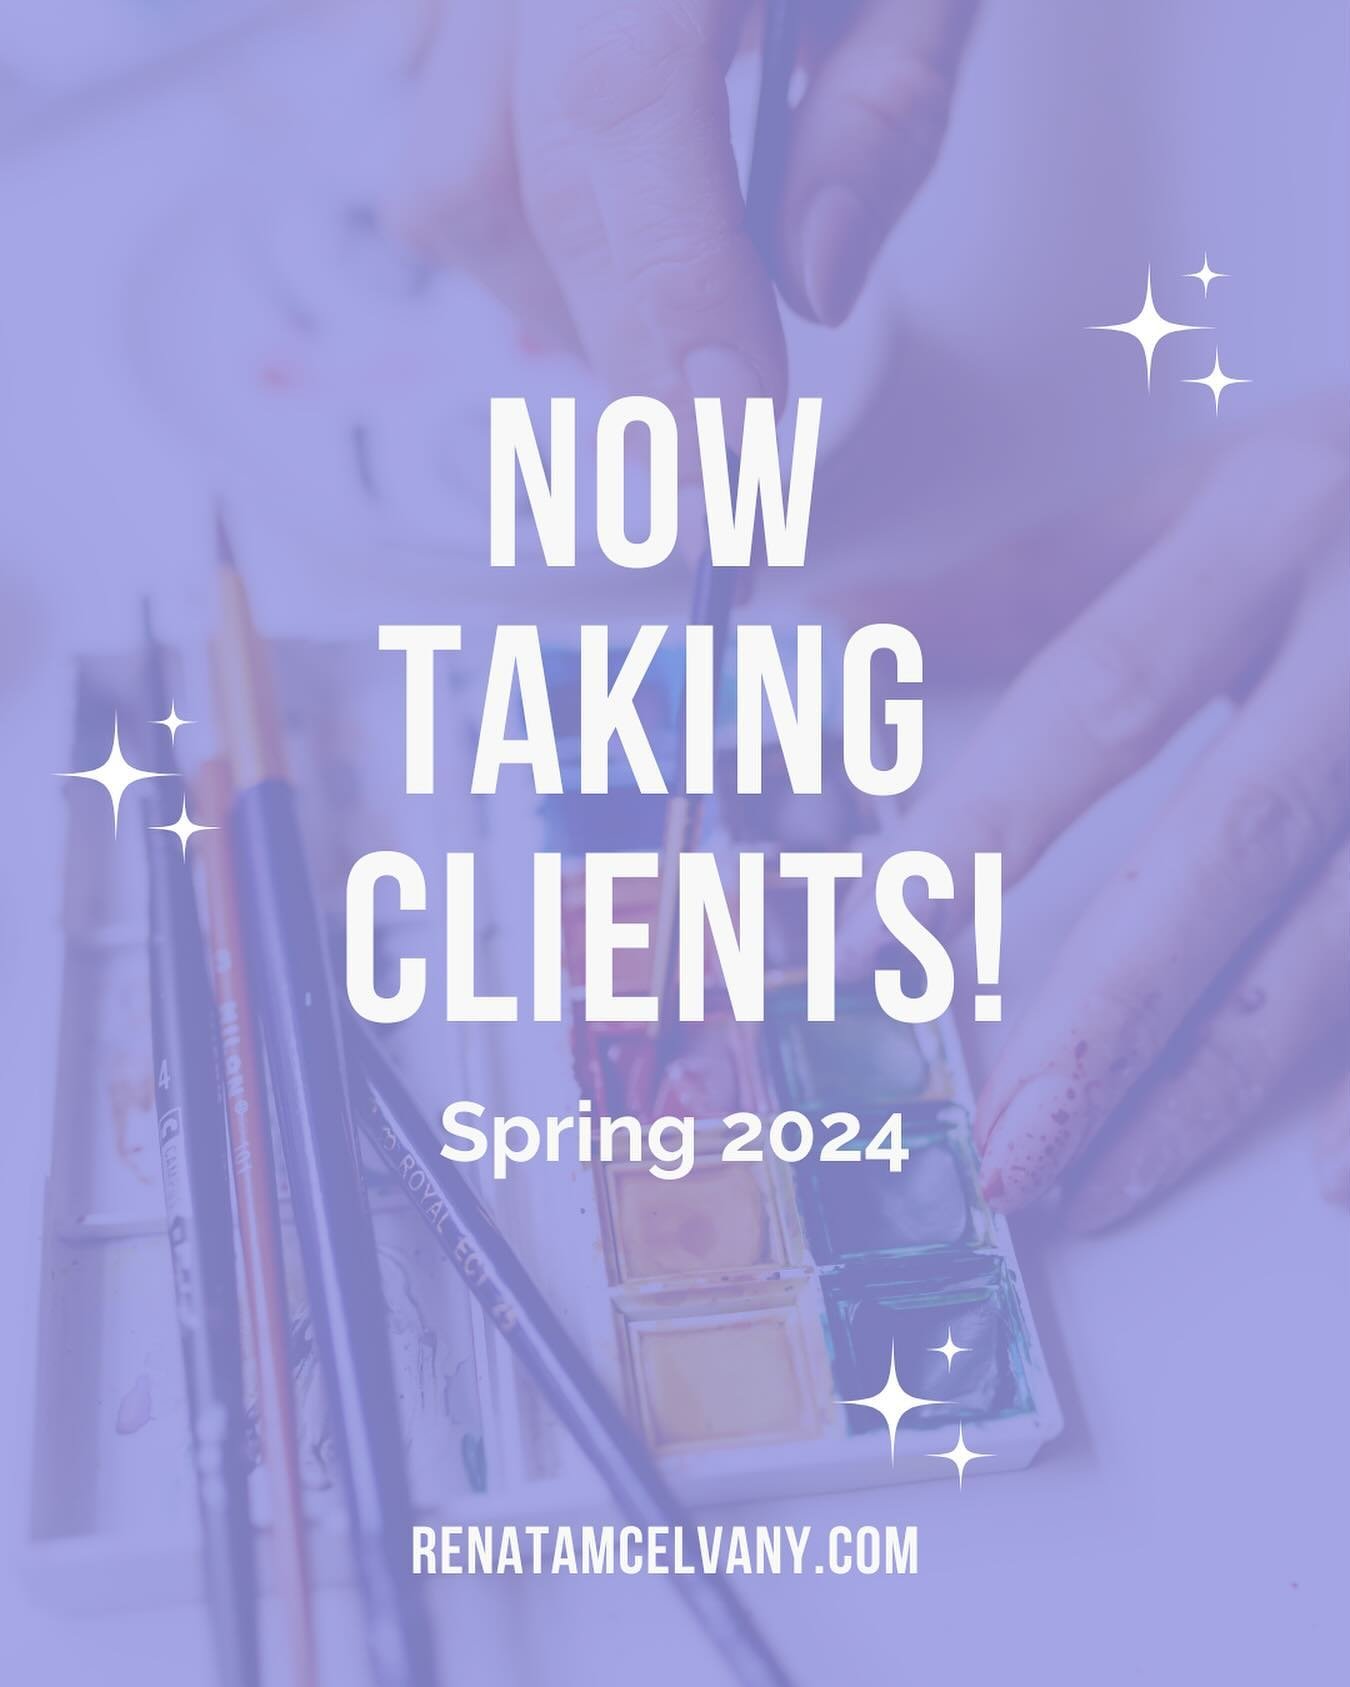 ⭐ NOW TAKING CLIENTS! ⭐️Creative ladies! If you&rsquo;ve been thinking about getting help with your creativity, this is your sign! 👇🏽👇🏽👇🏽👇🏽

I have 4 spots open for clients right now!

If you&rsquo;re interested in working with me, comment &l